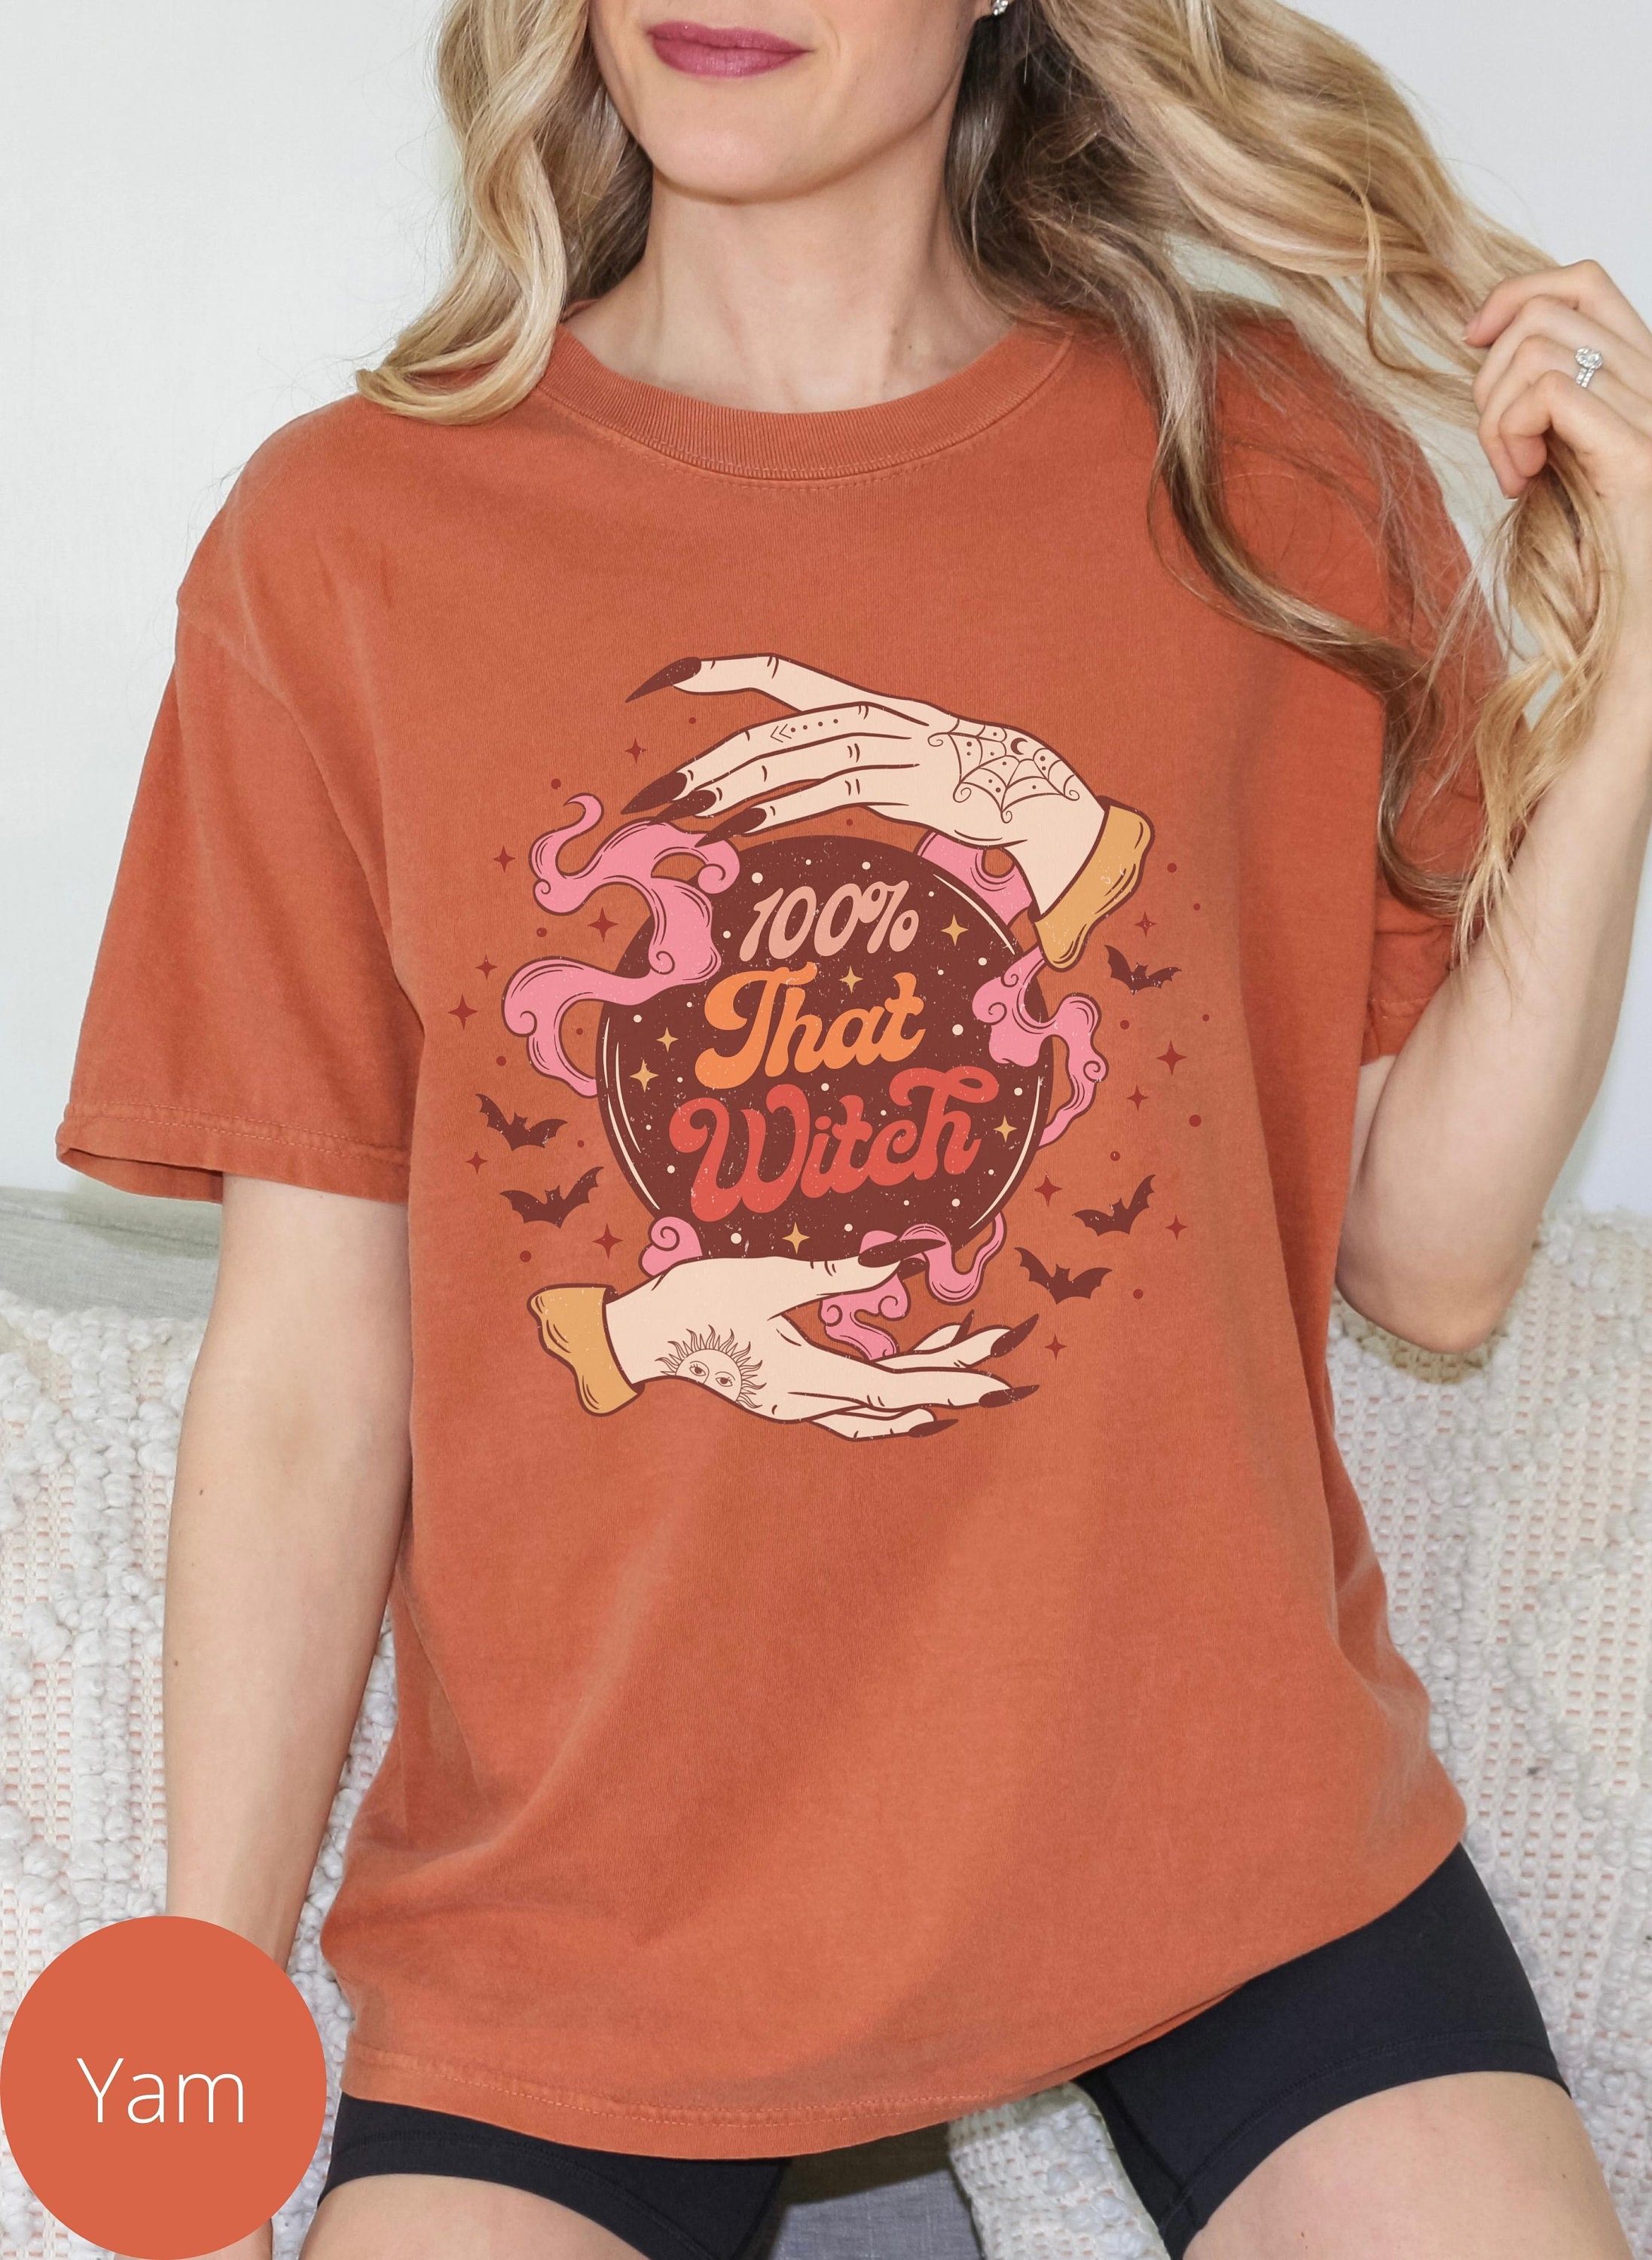 Discover That Witch , Halloween Witch, Witchy Shirt, Womens Witch Shirt, Boho Witch, Boho Halloween, Womens Boho, Halloween TShirt